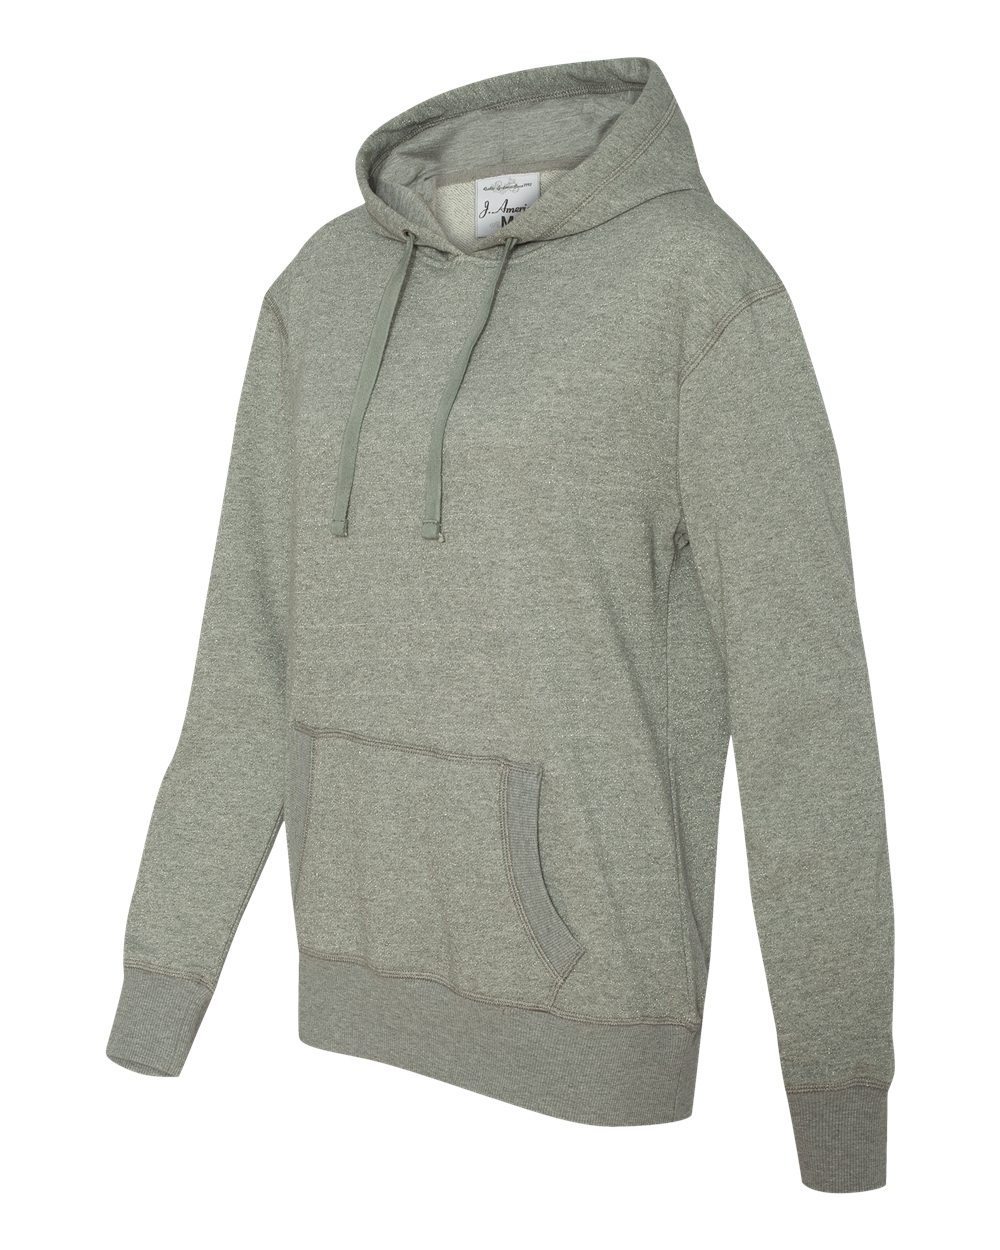 J. America Ladies' Glitter French Terry Hooded Pullover - 8860